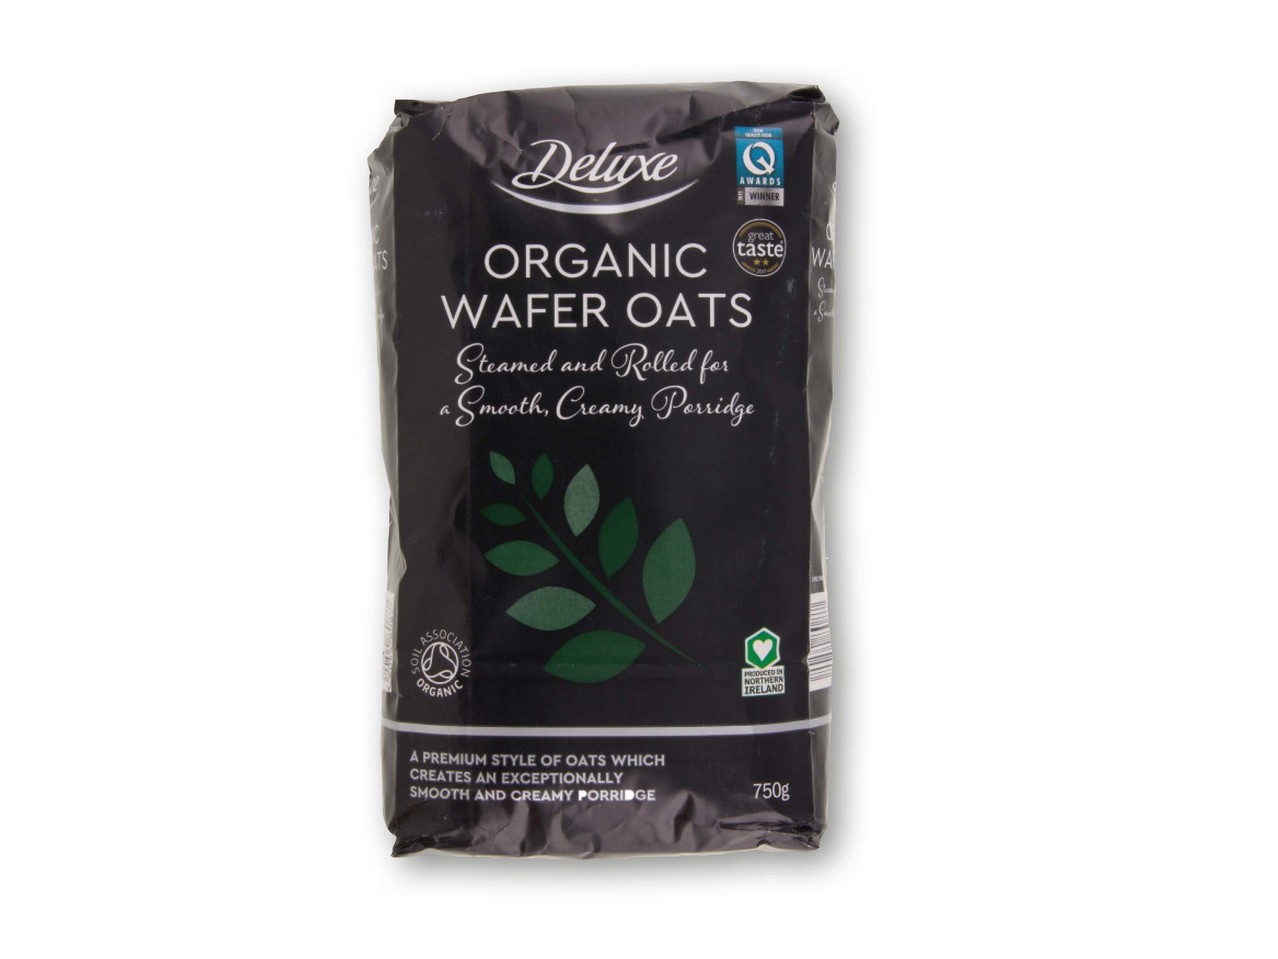 Deluxe ORGANIC WAFER OATS